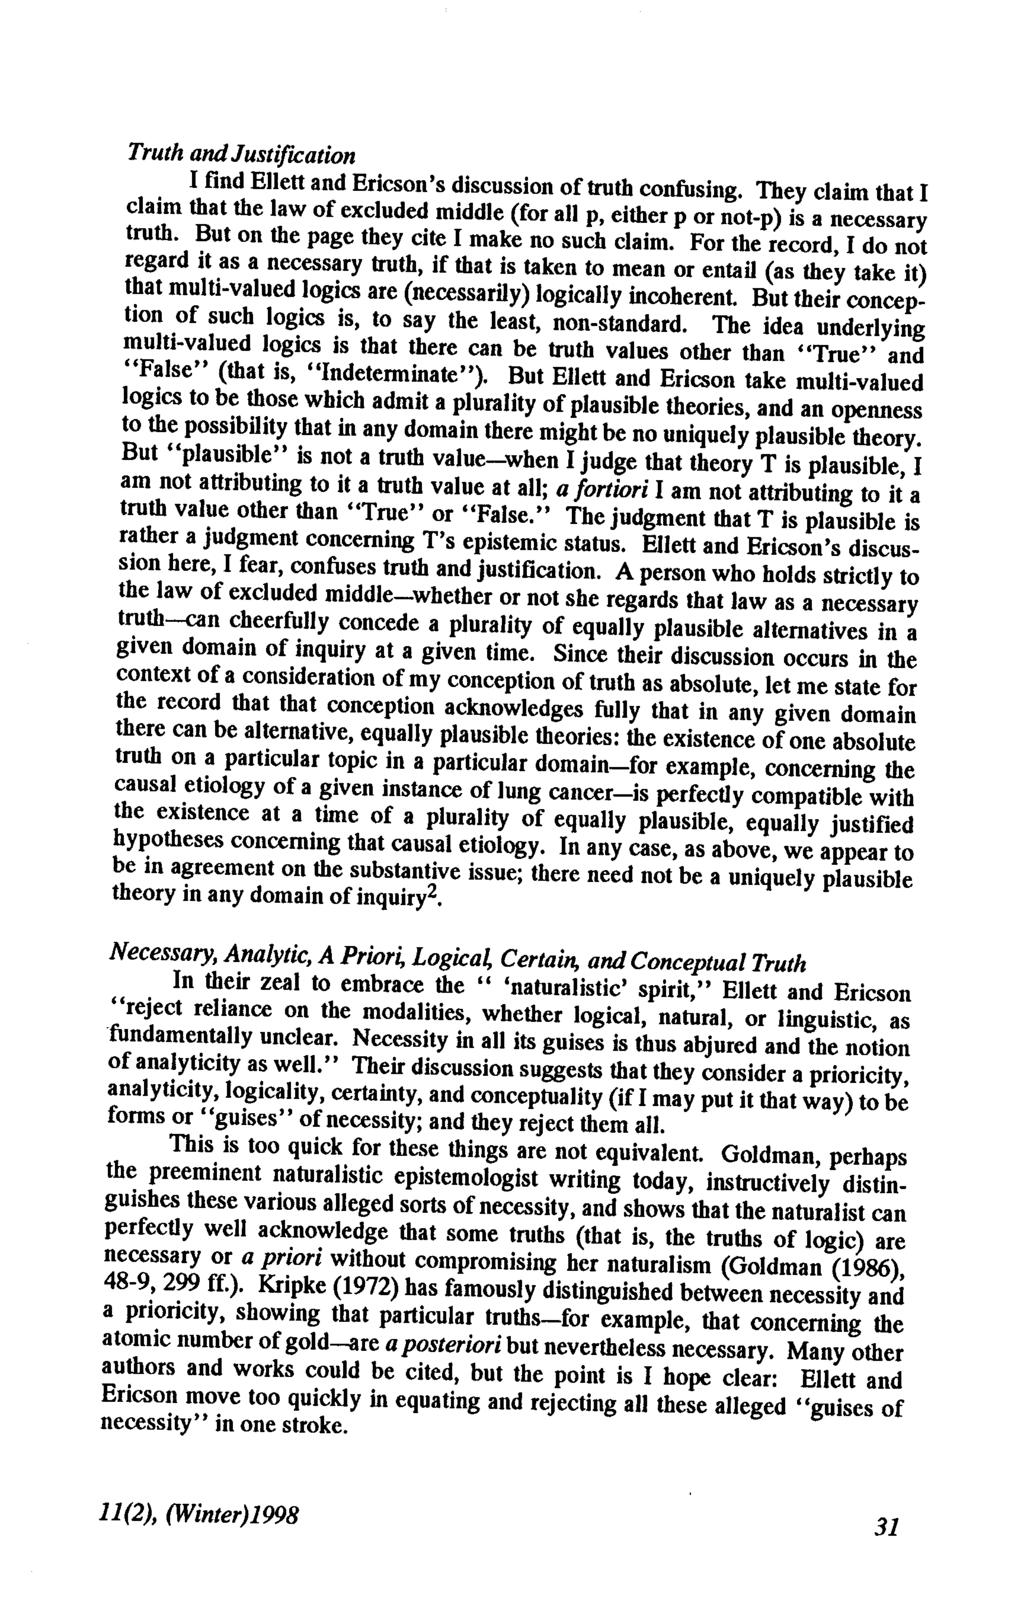 Truth and J ustiftcation I find Ellett and Ericson's discussion of truth confusing. They claim that I claim that the law of excluded middle (for all p, either p or not-p) is a necessary truth.